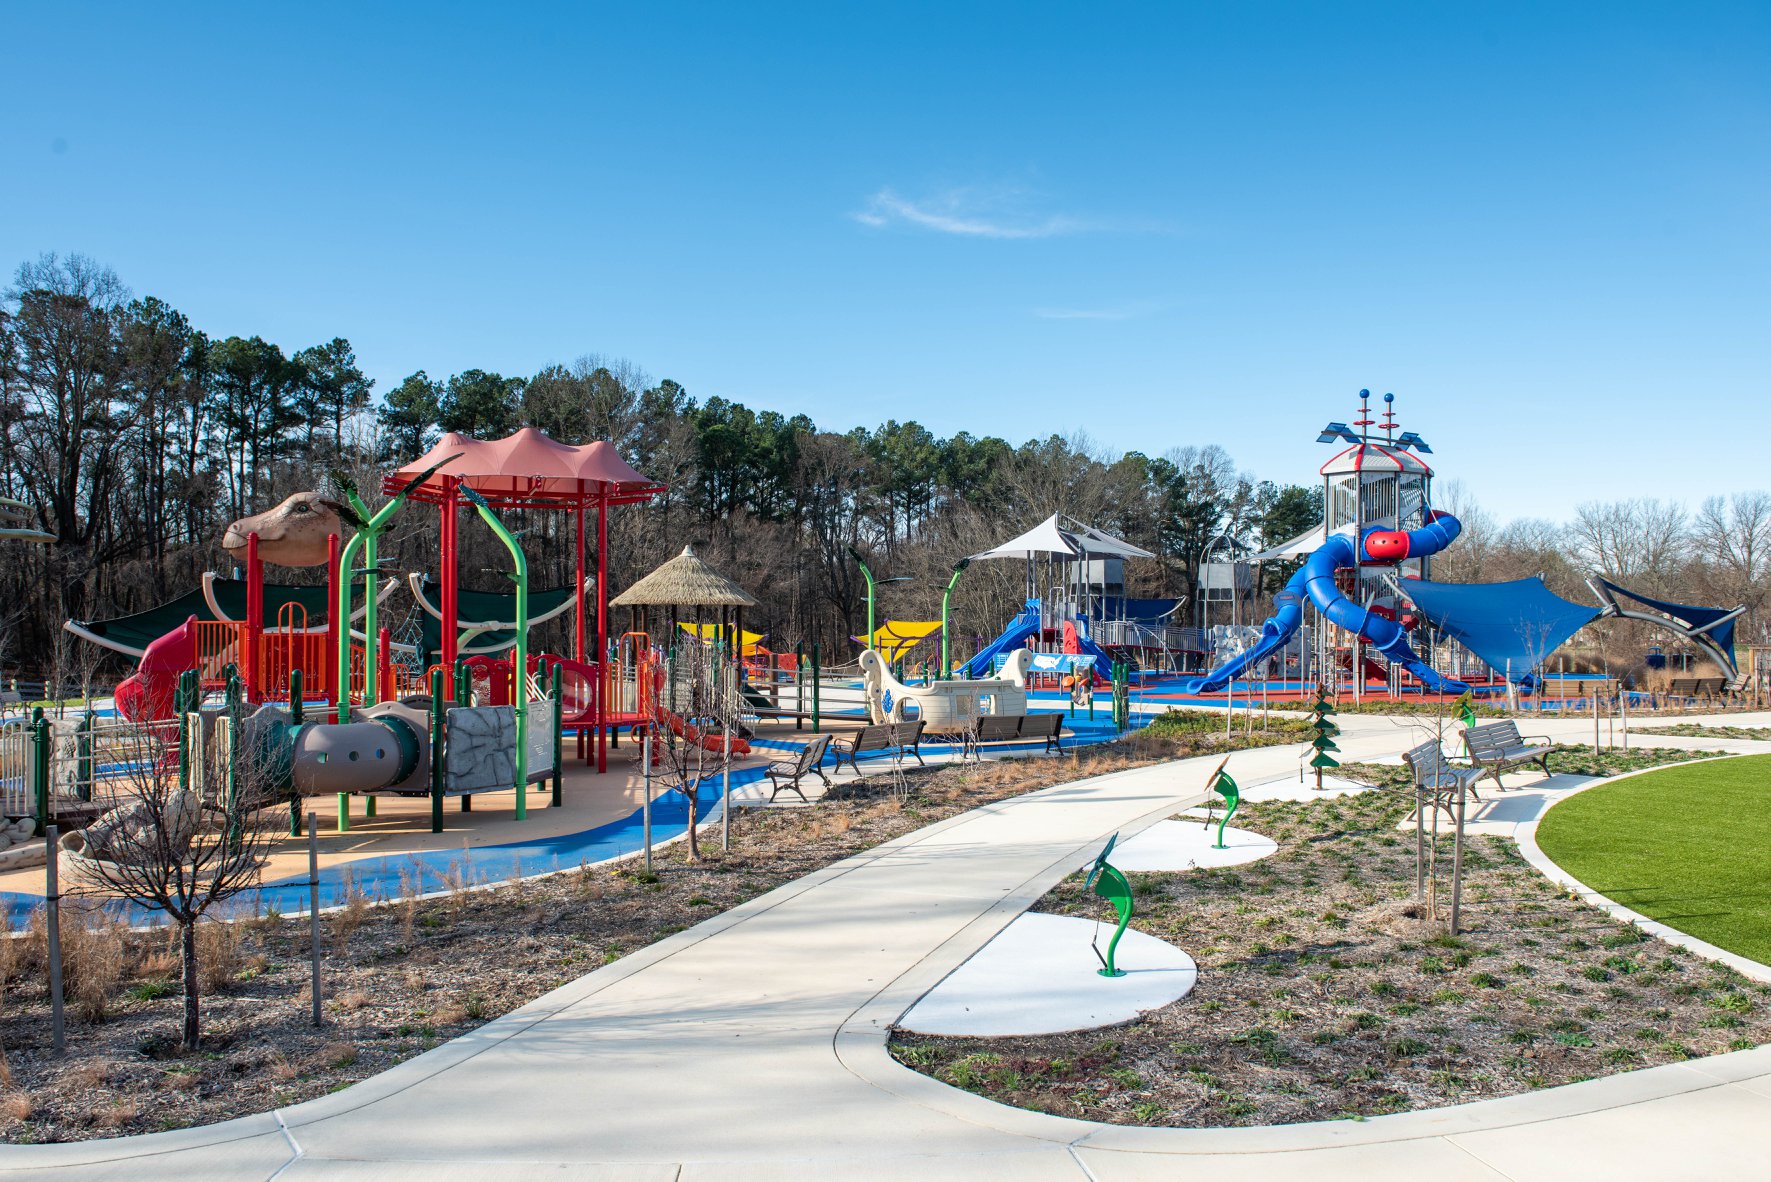 The Coolest Playgrounds in the Baltimore Area